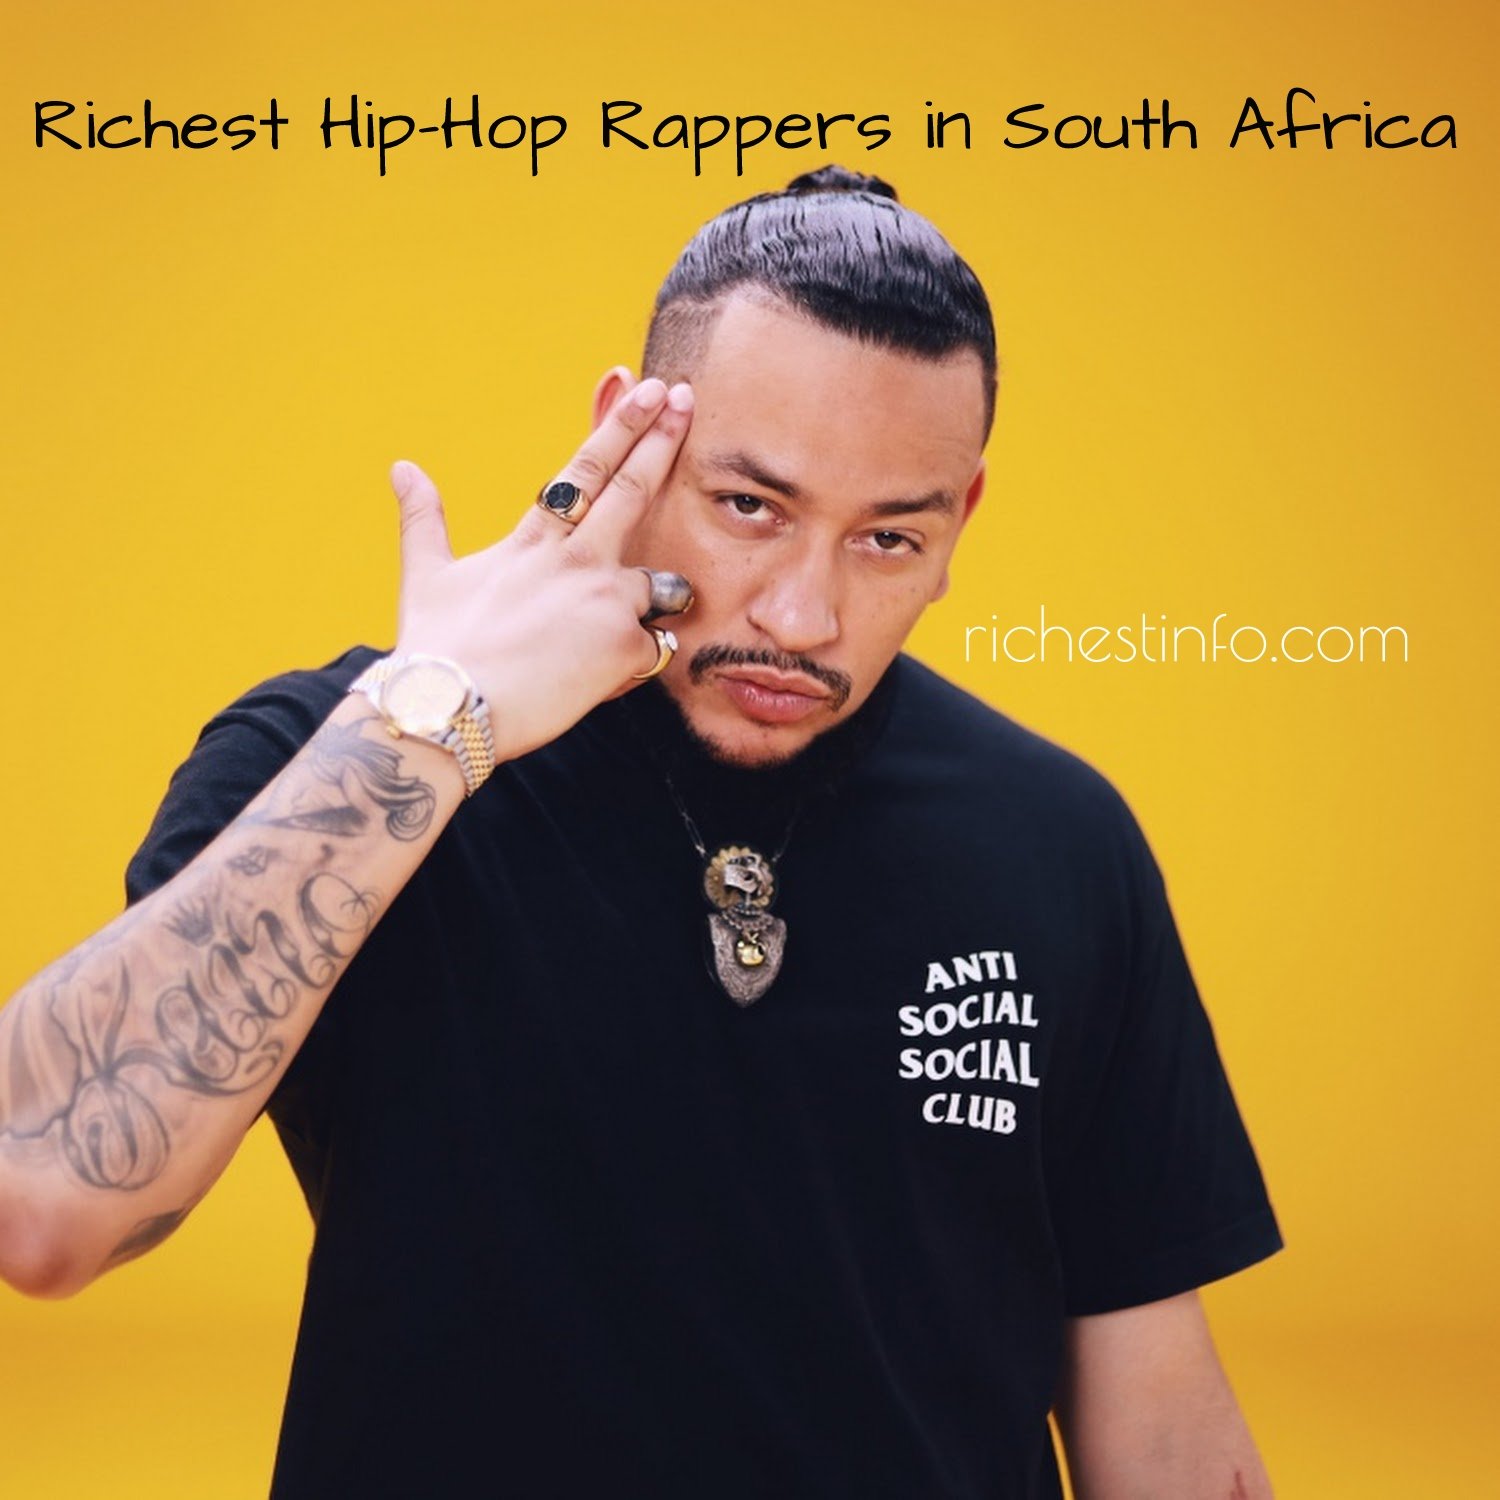 Top 10 richest rappers in South Africa 2022 Forbes